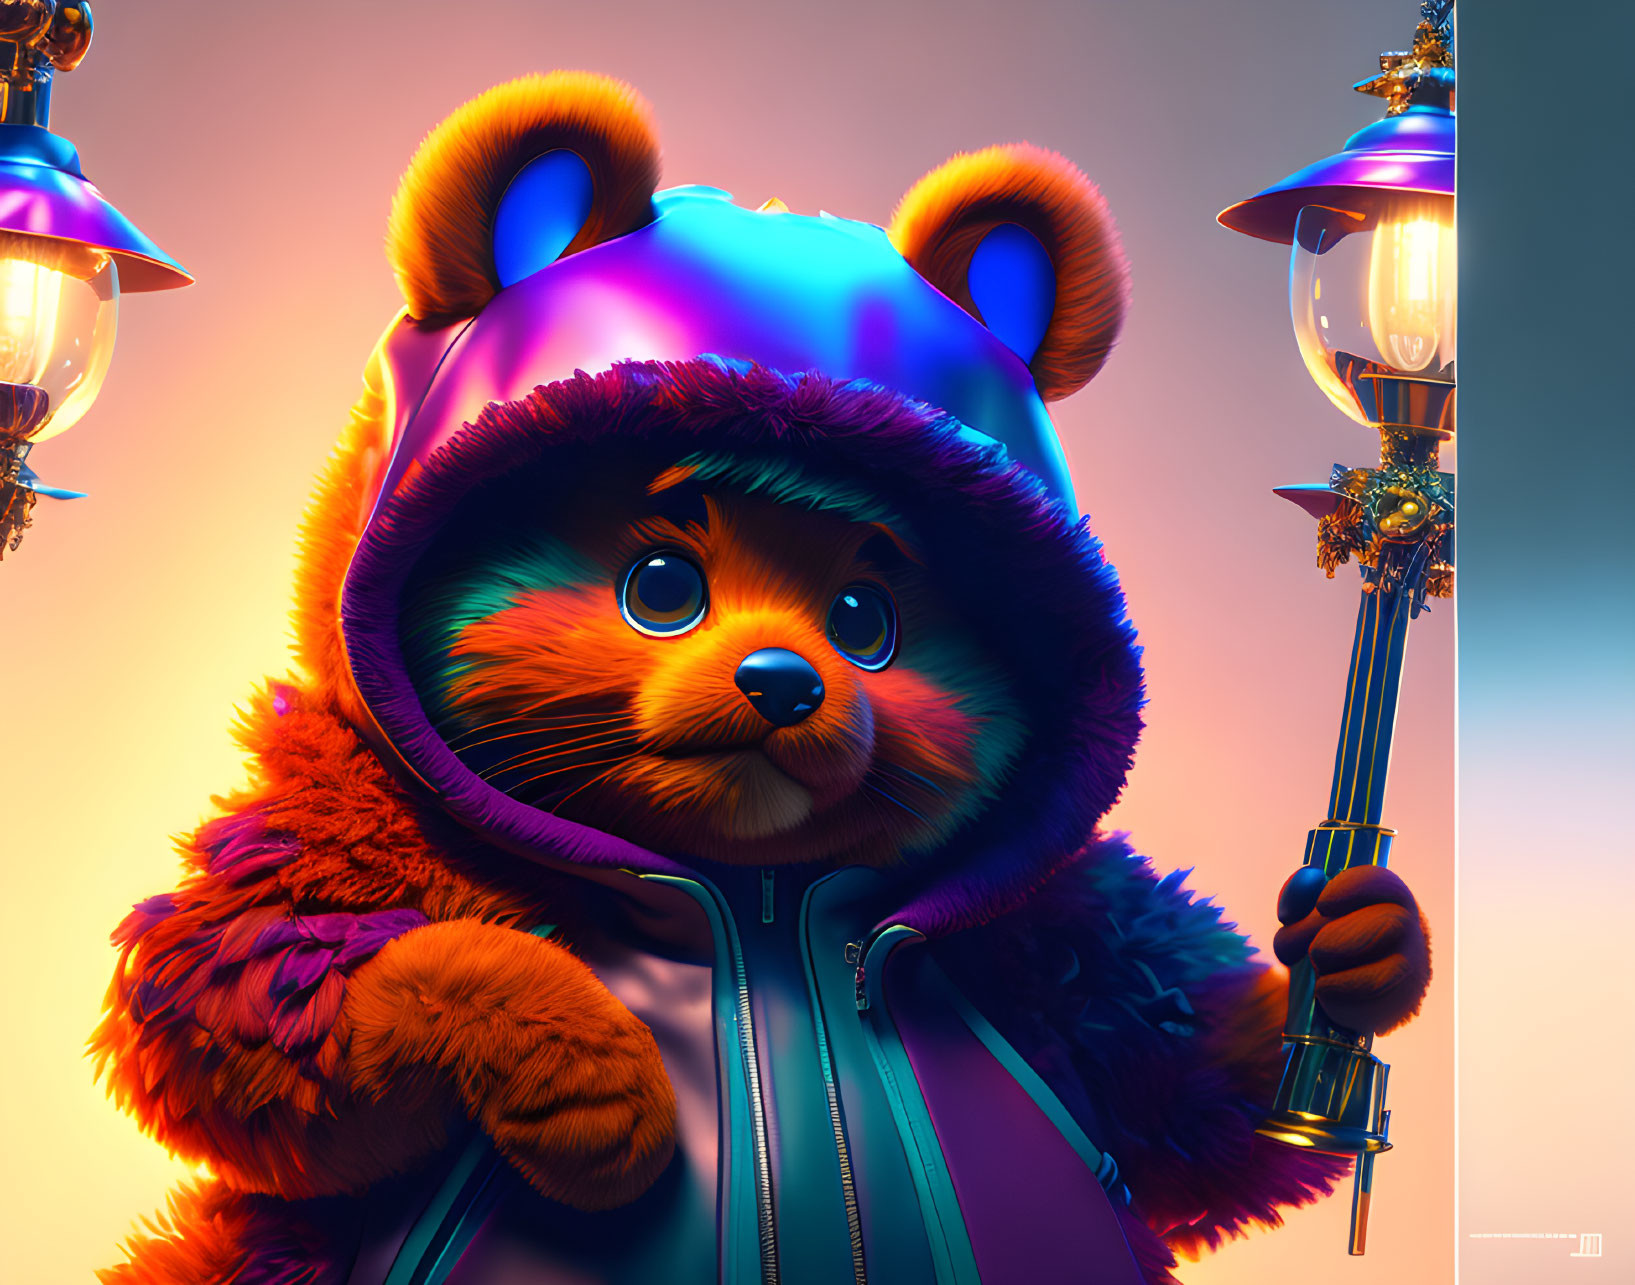 Vibrant anthropomorphic bear illustration with lamppost in colorful hoodie